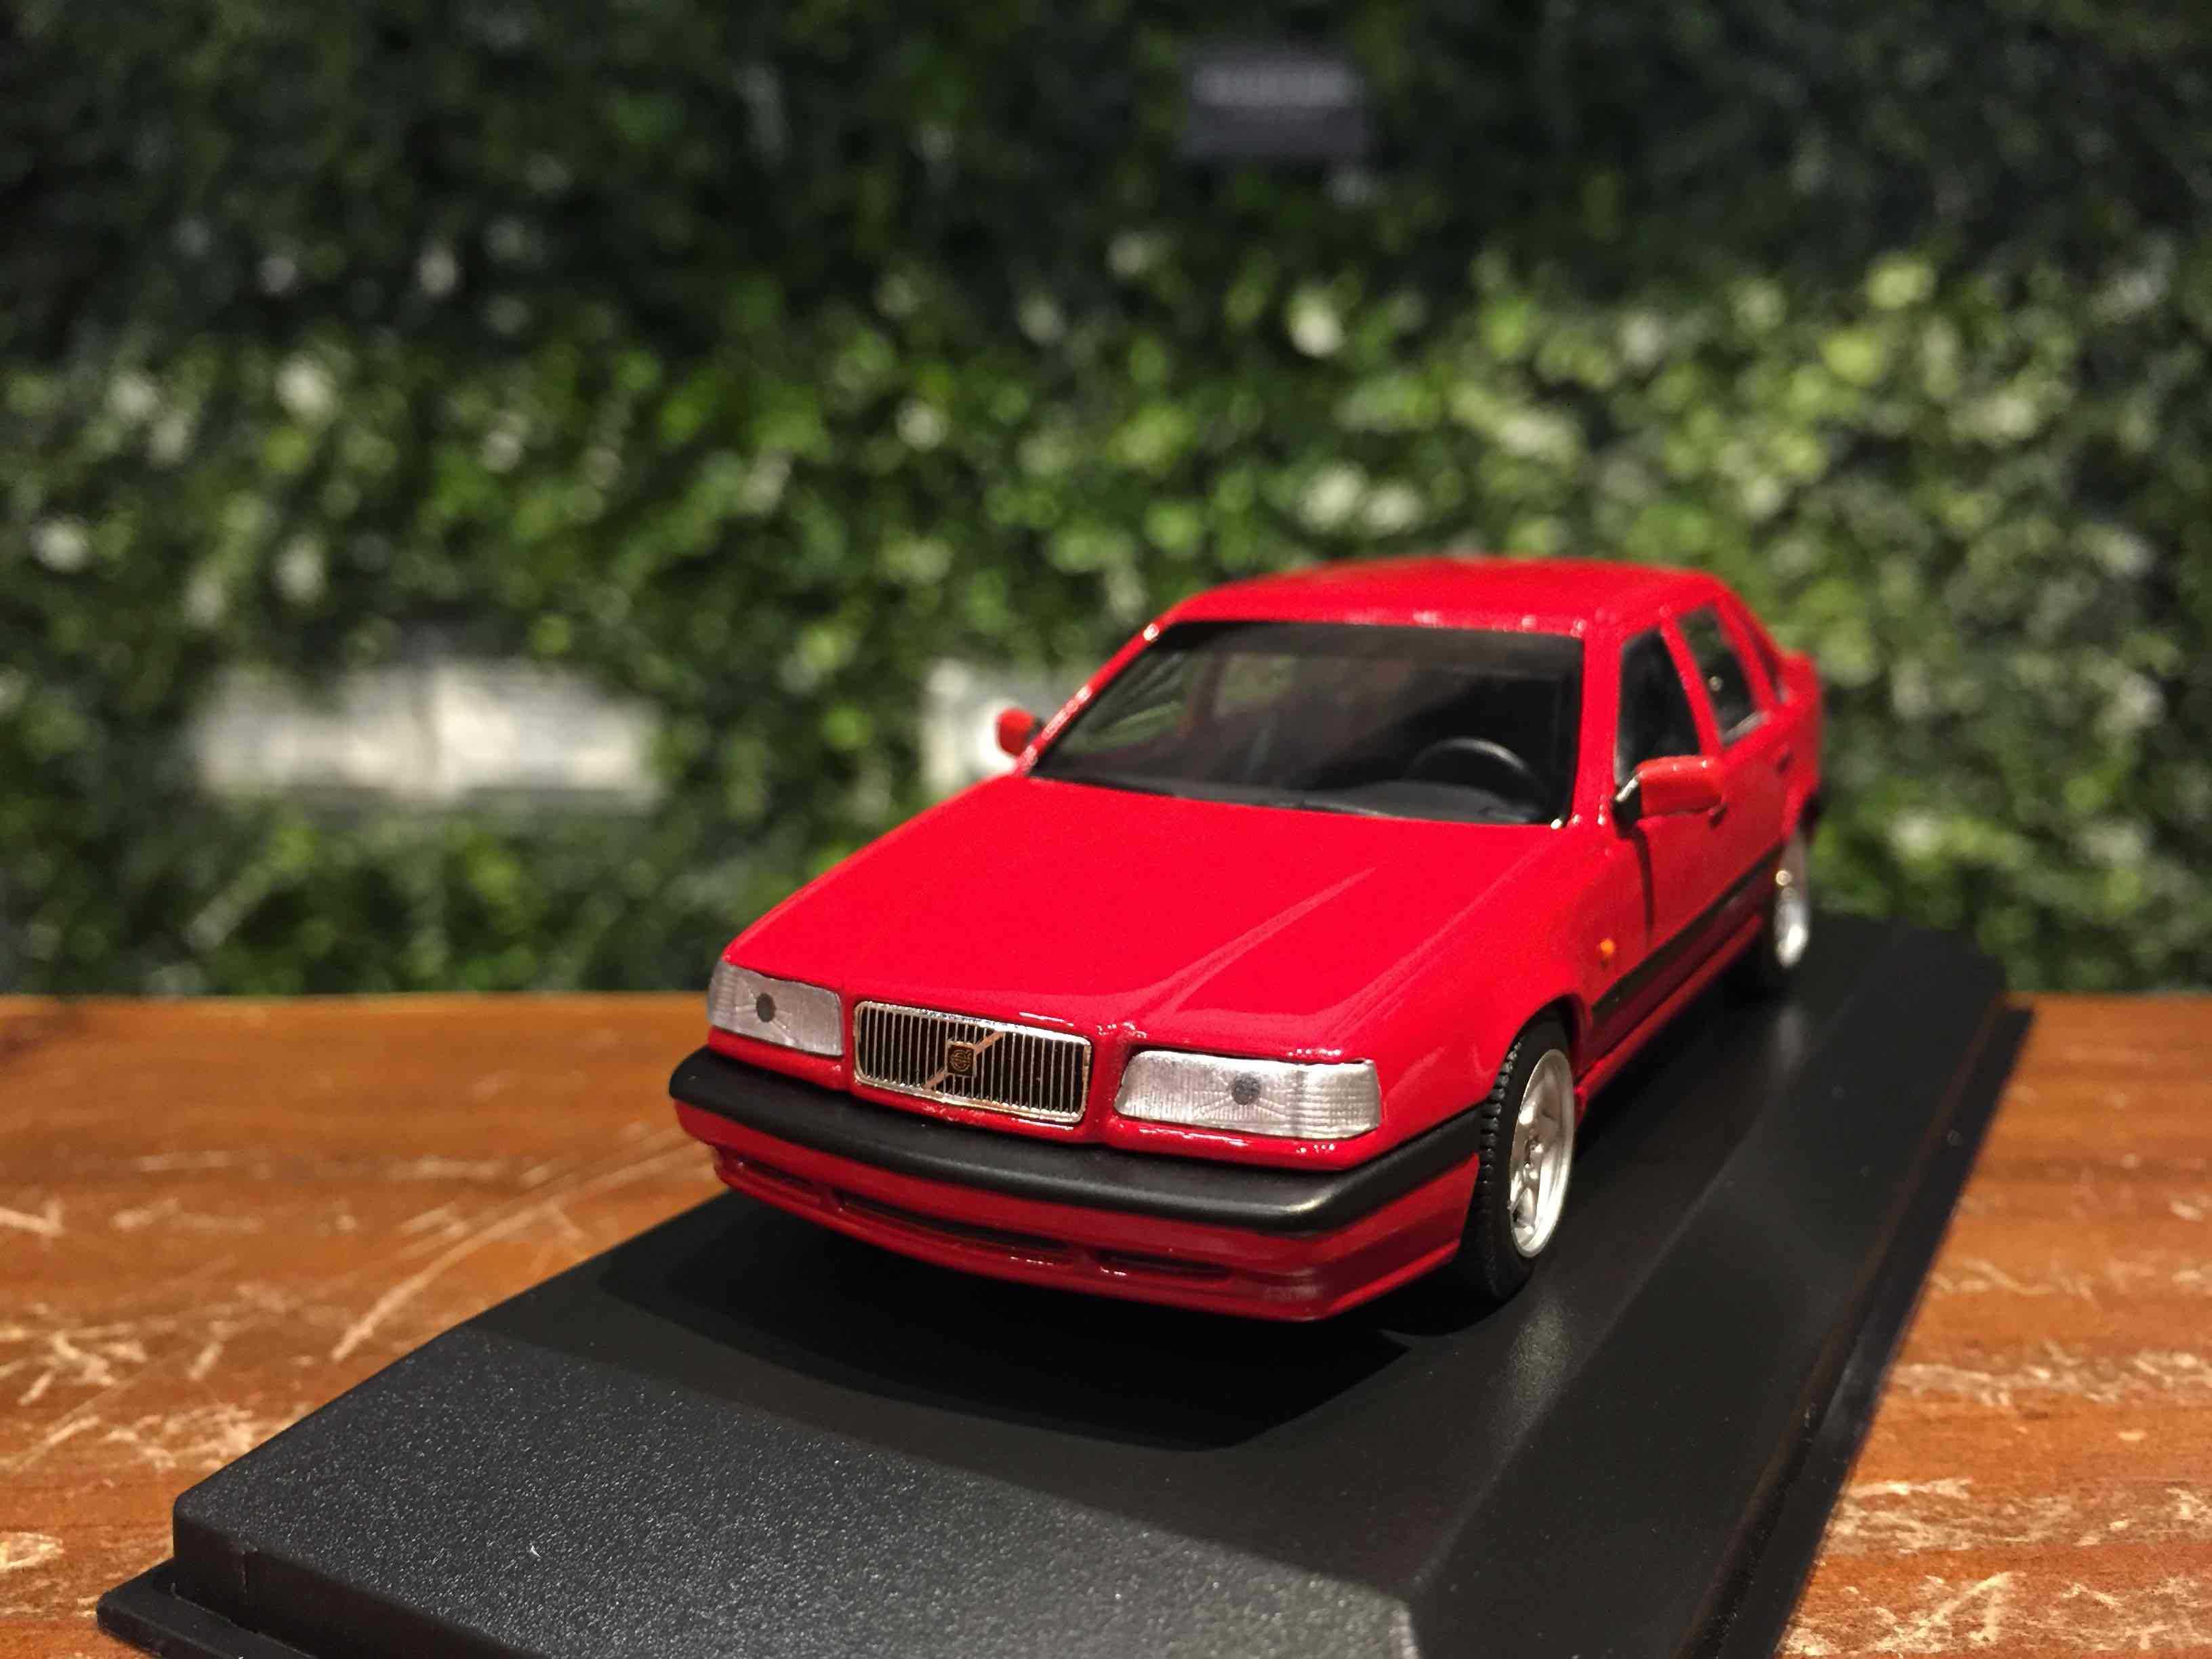 1/43 Minichamps Volvo 850 1994 Red 940171460【MGM】